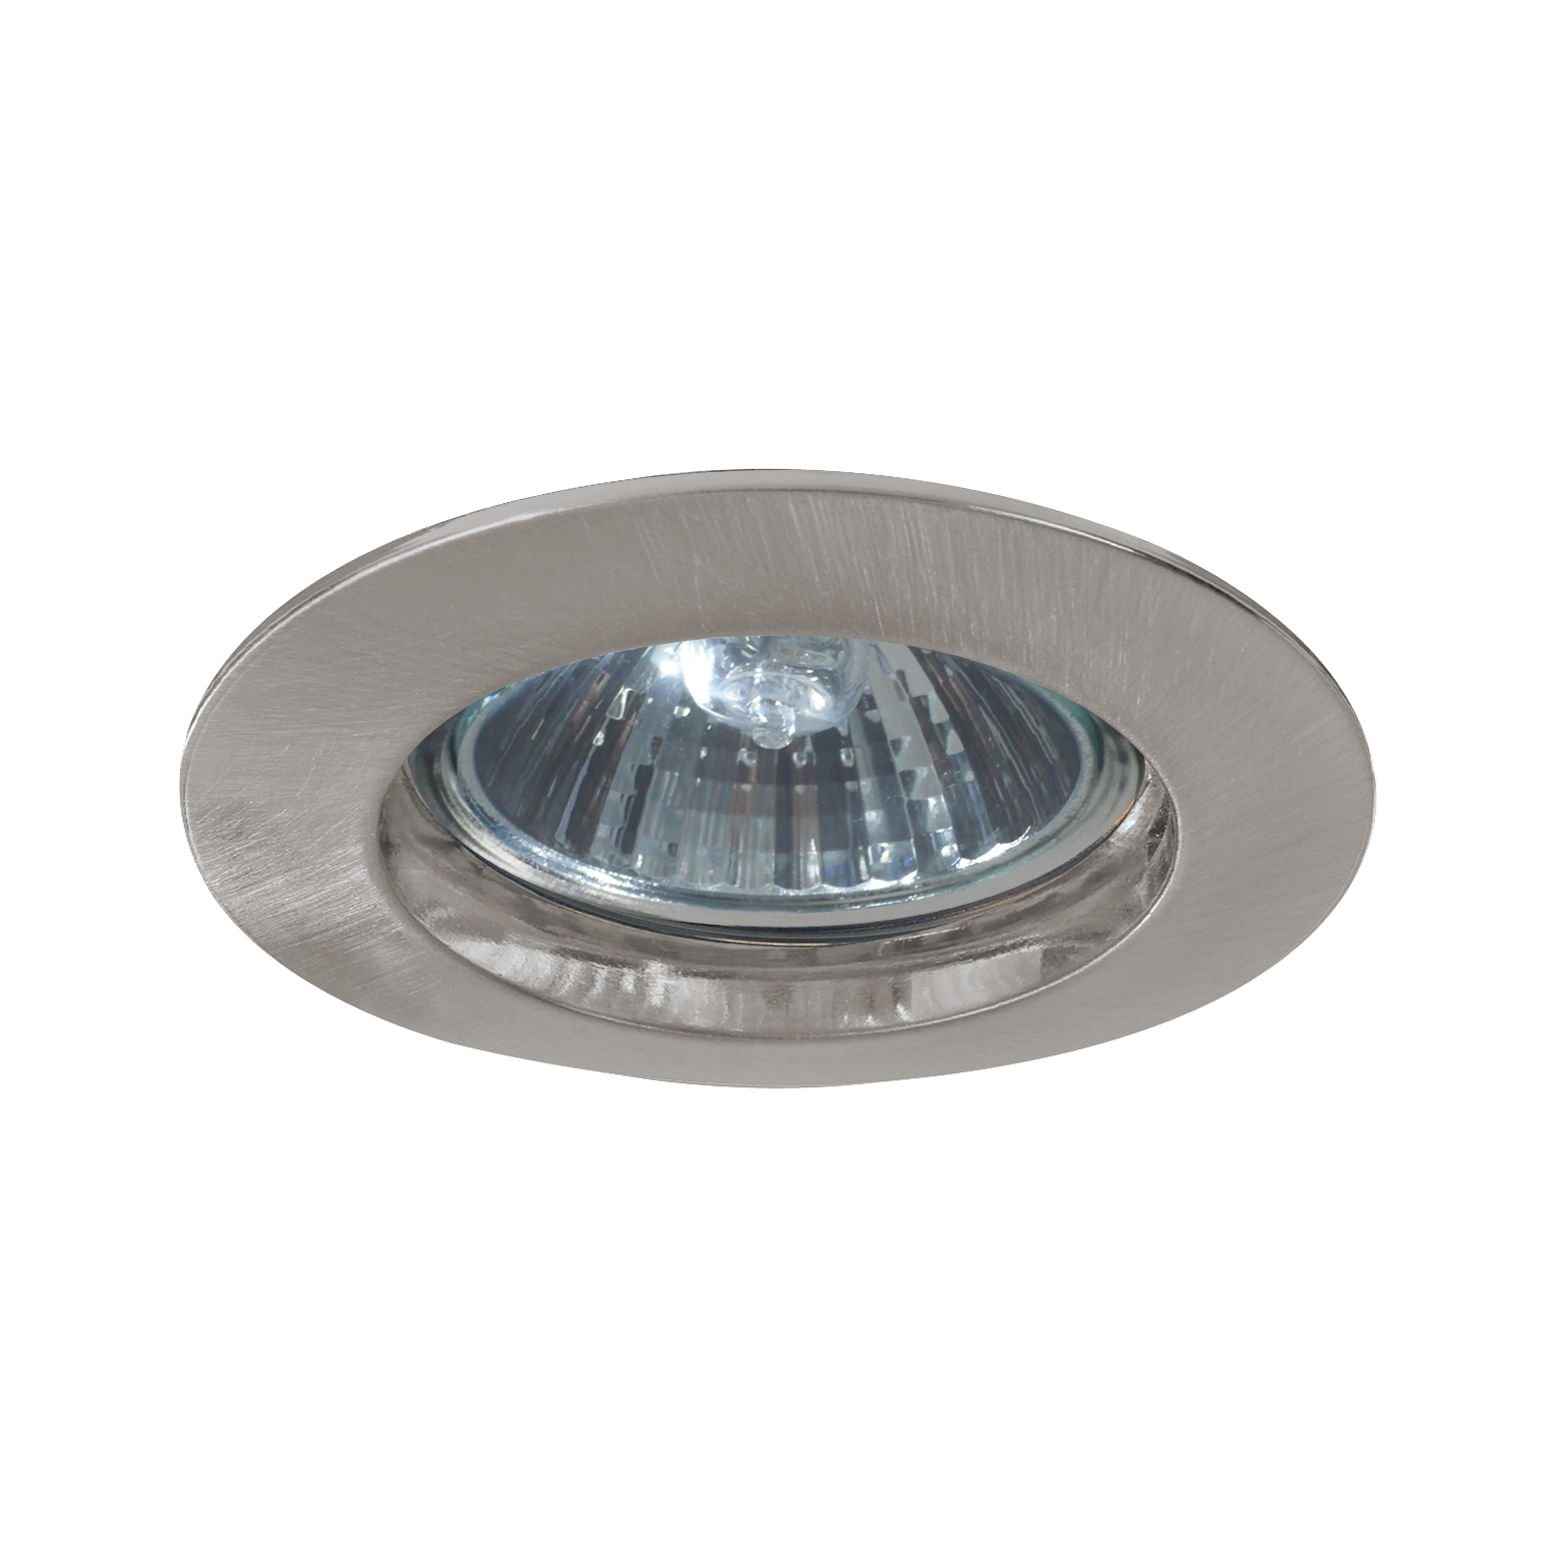 Premium LED Recessed luminaire IP44 round 79mm GU10 max. 50W 230V dimmable Brushed iron